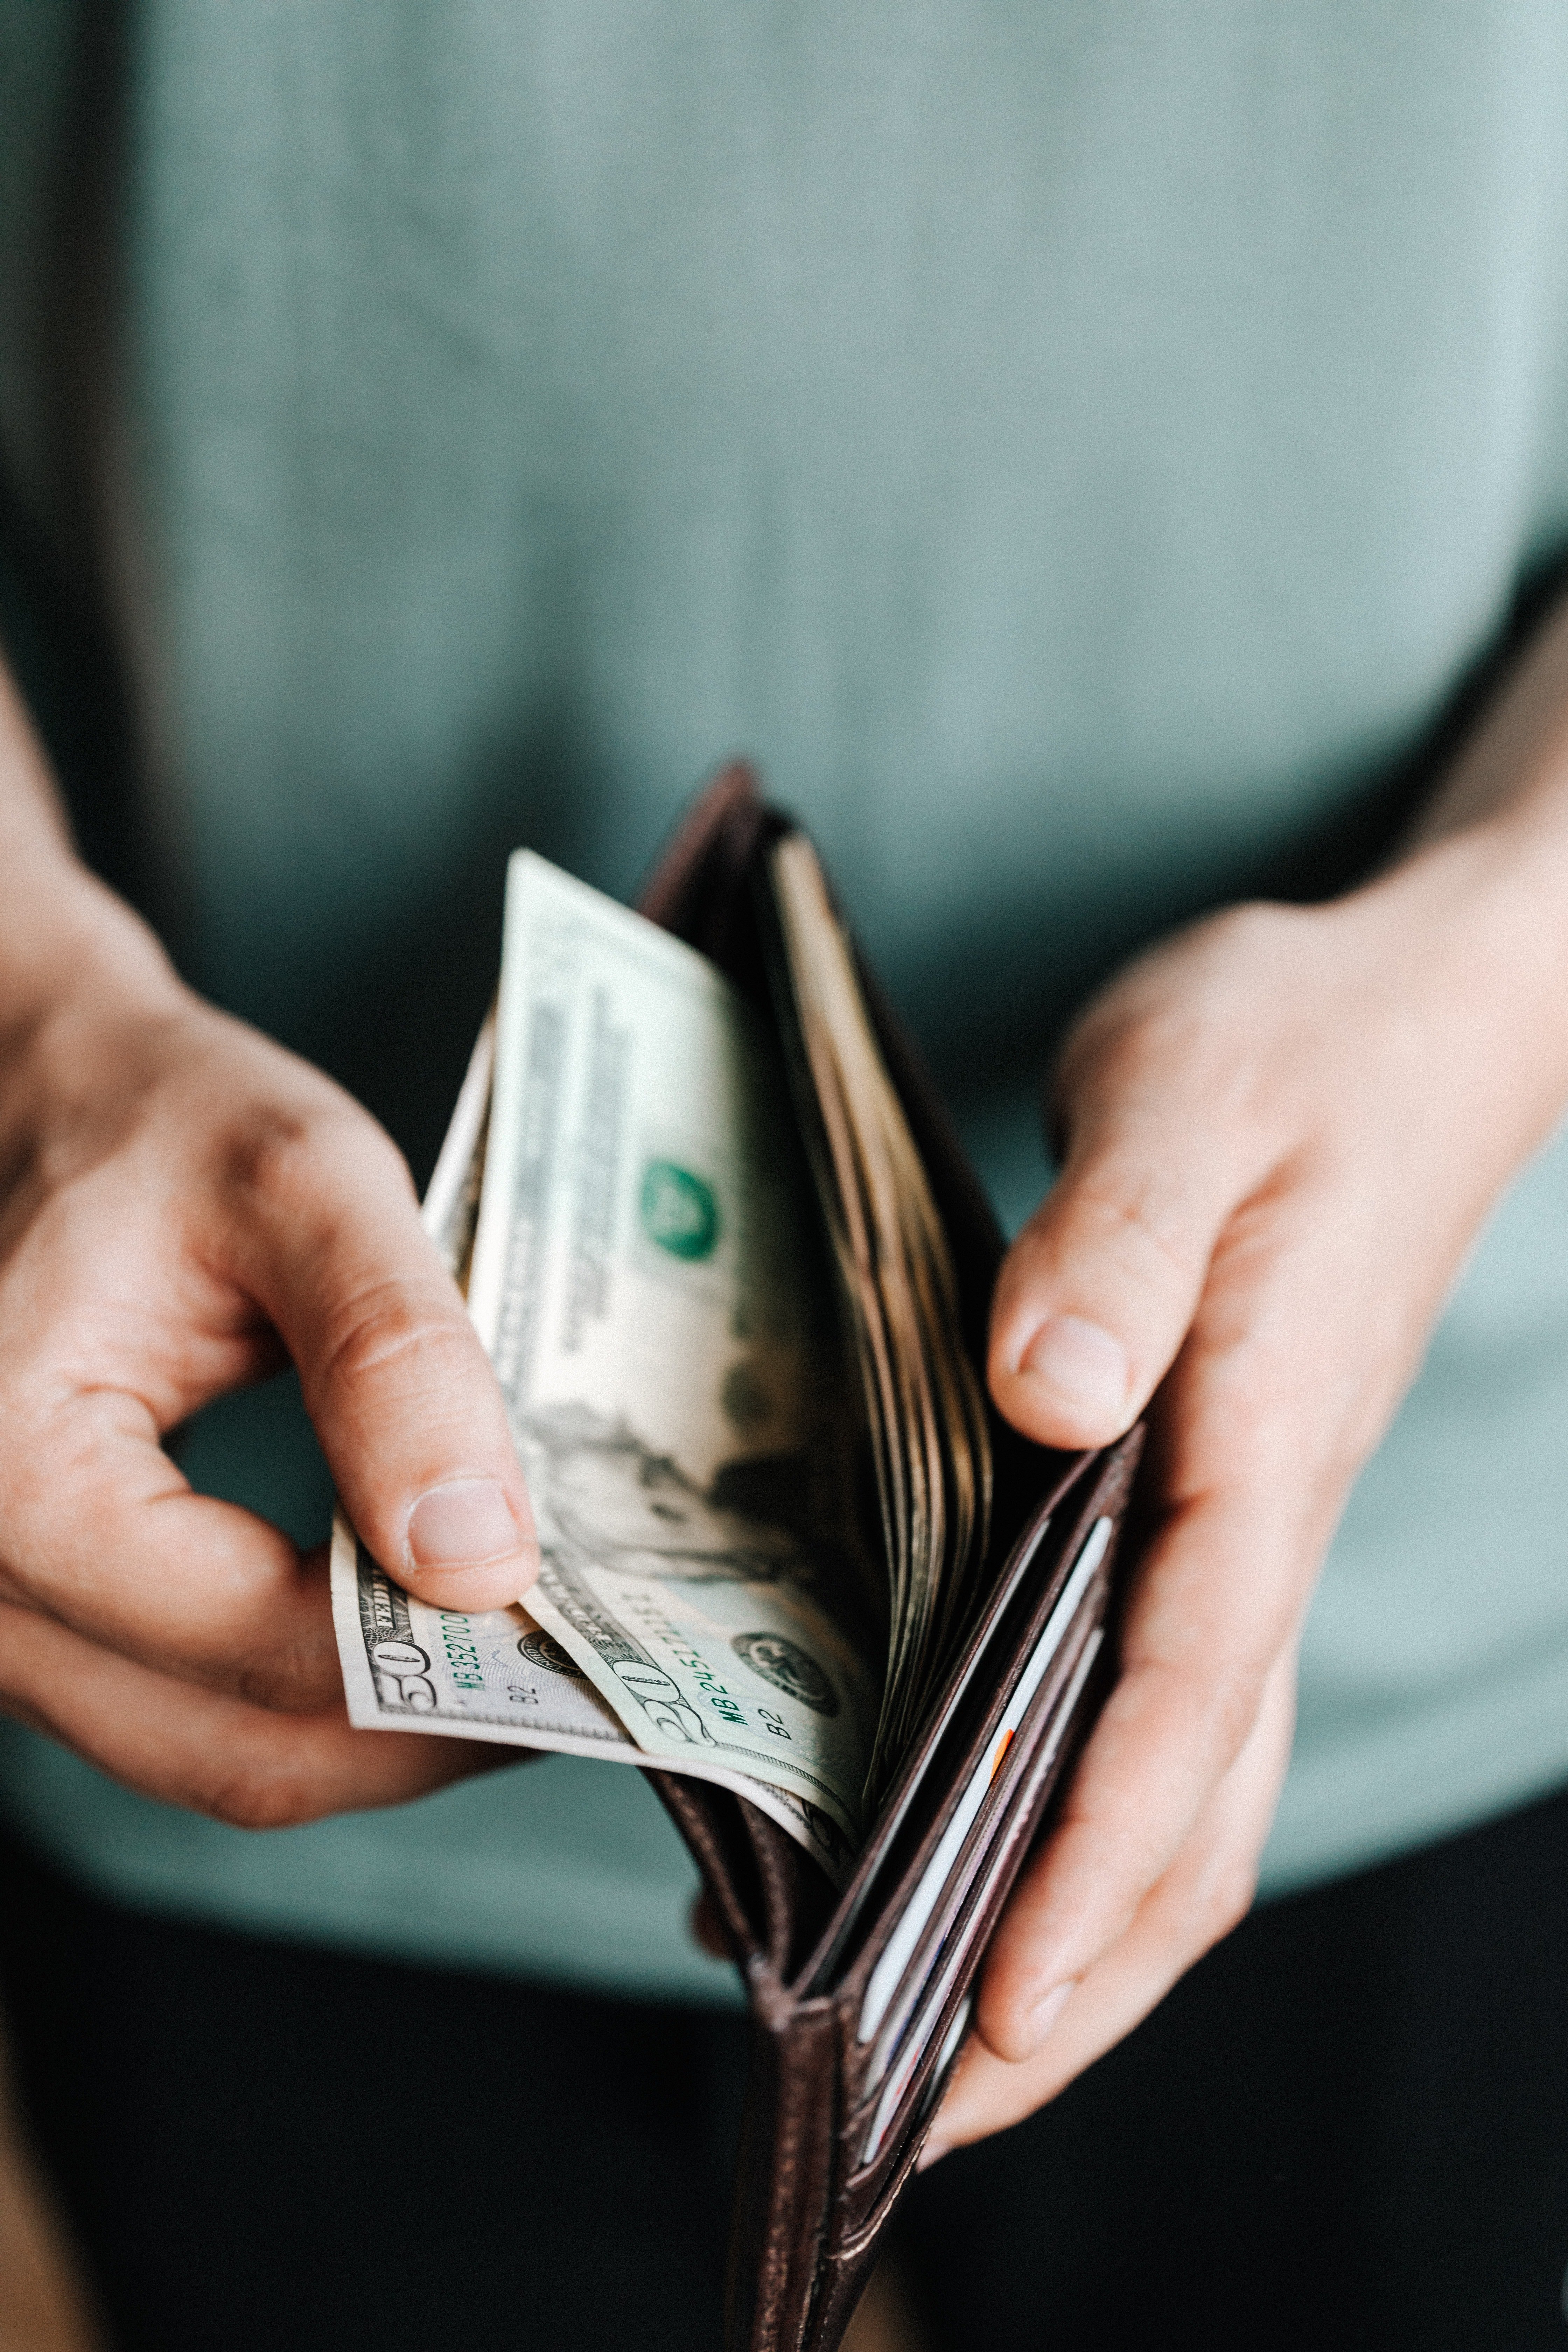 Steve gave Luke some money so he could pay for his food at the bakery | Photo: Pexels